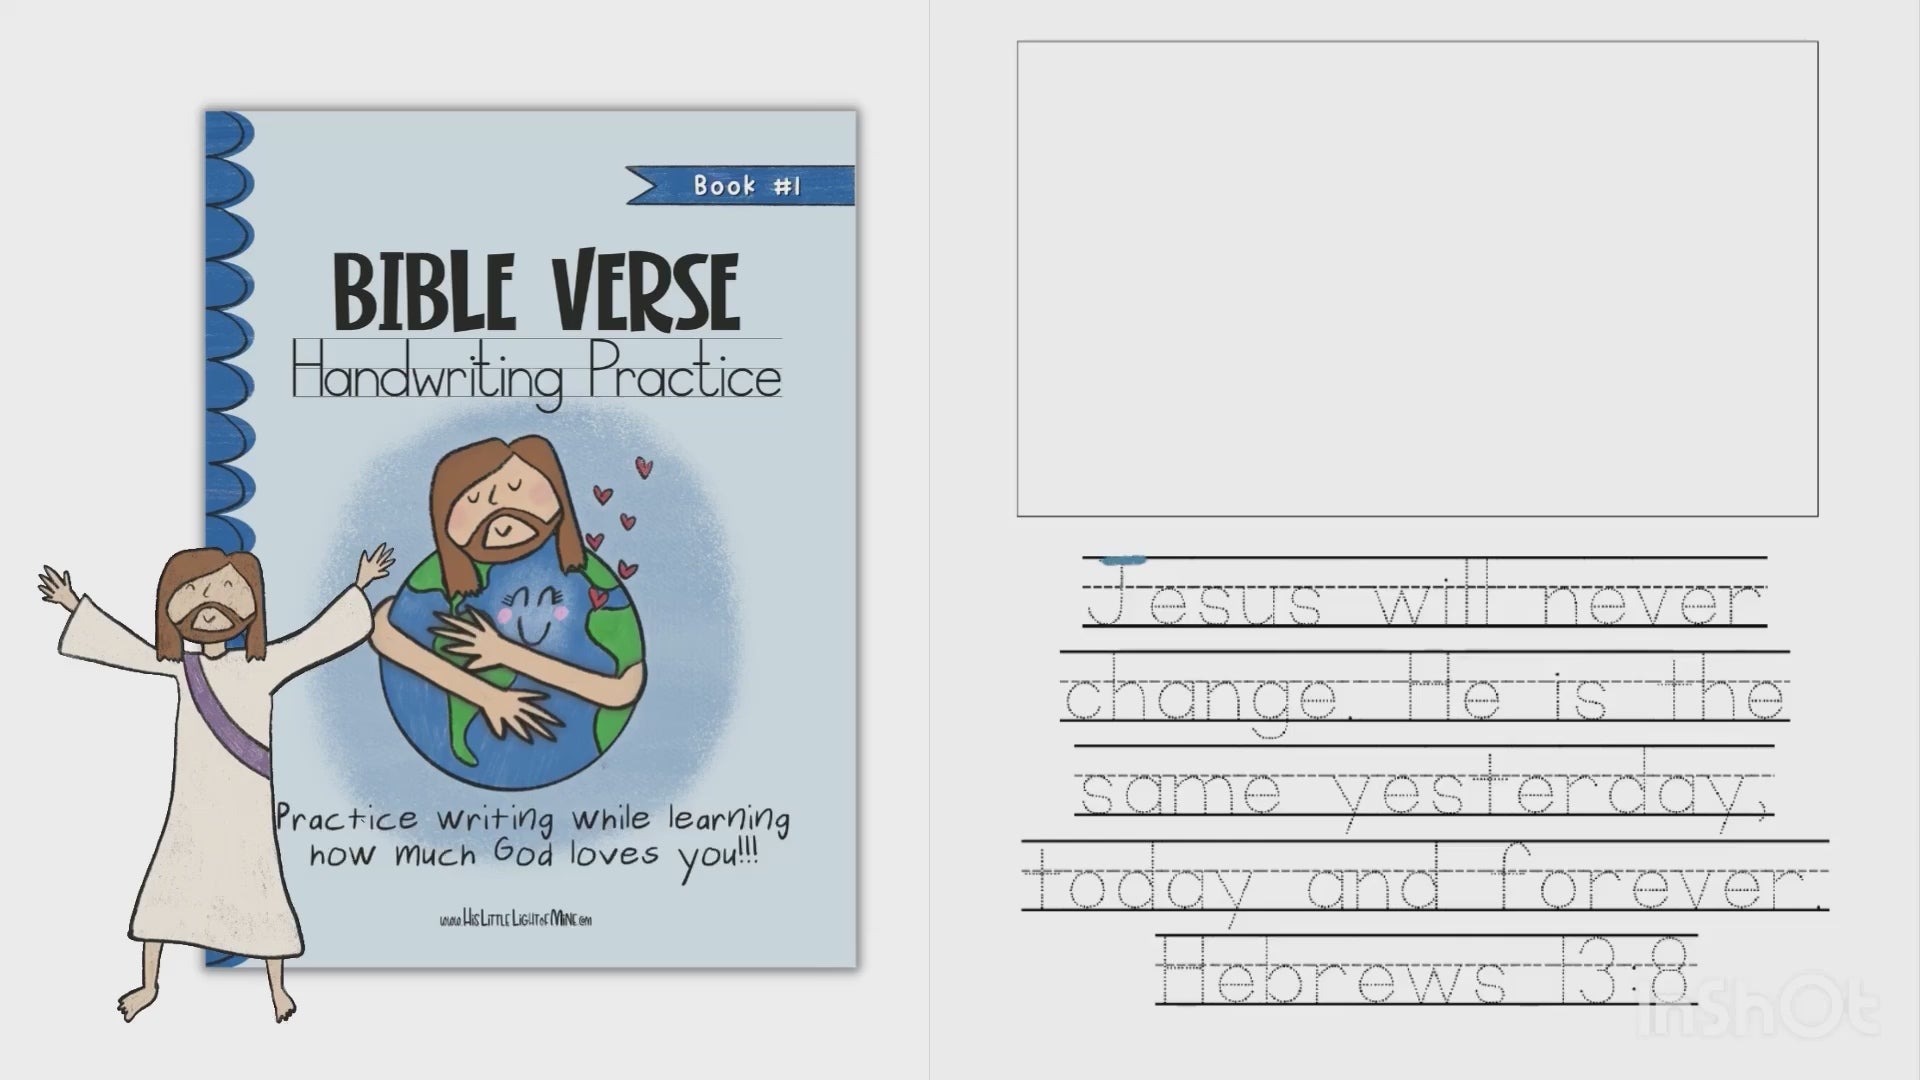 Load video: A video featuring handwriting practice in both print and cursive from the Bible Verse Handwriting Book self published through Kindle Direct Publishing